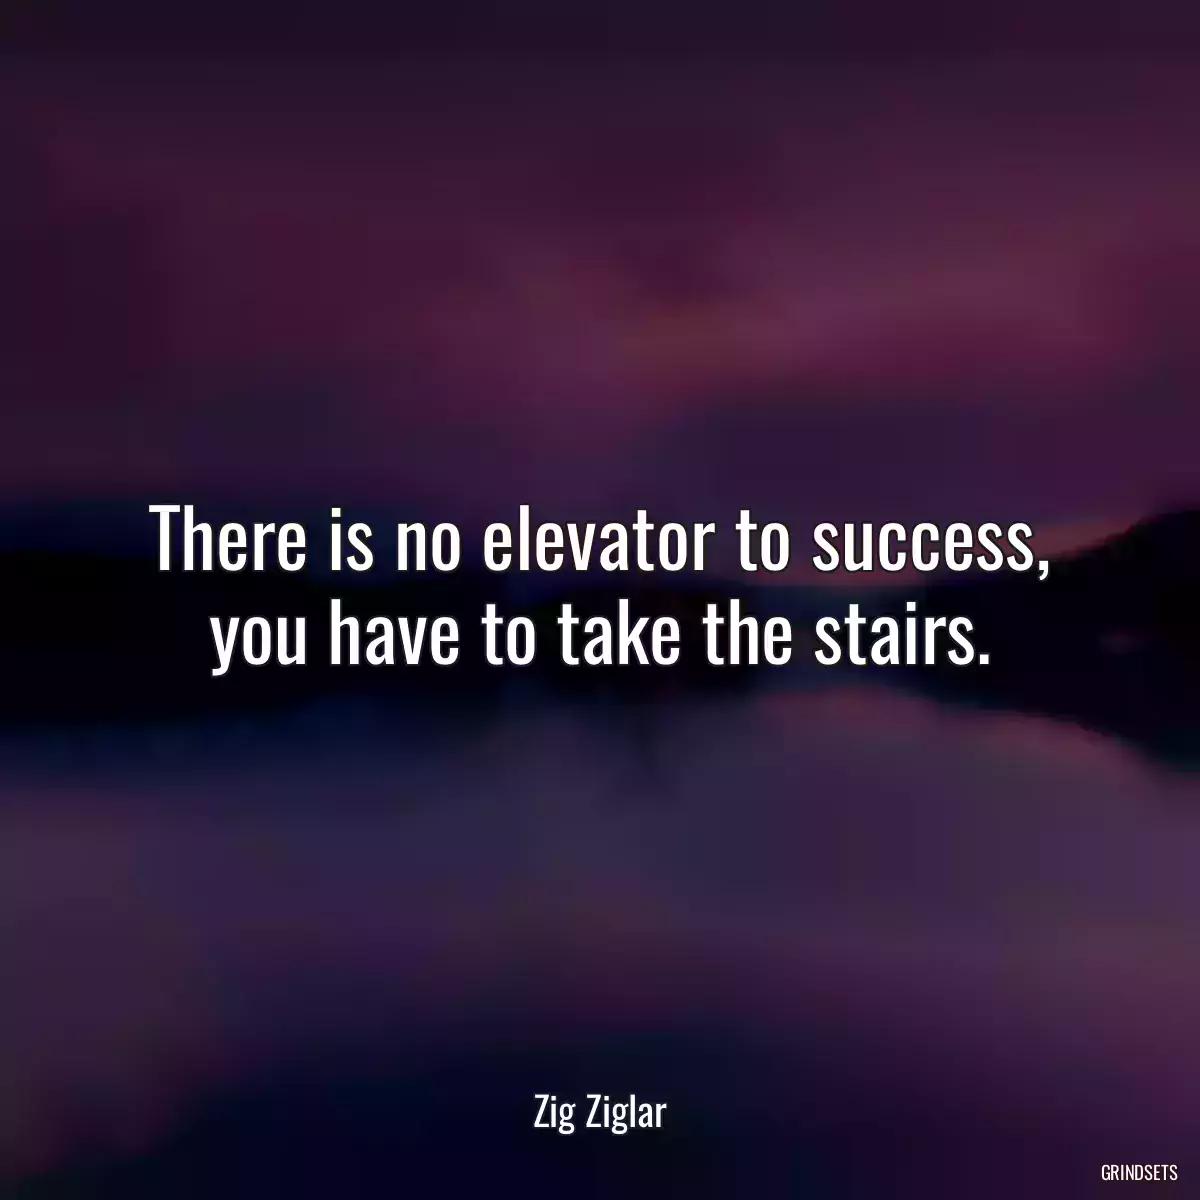 There is no elevator to success, you have to take the stairs.